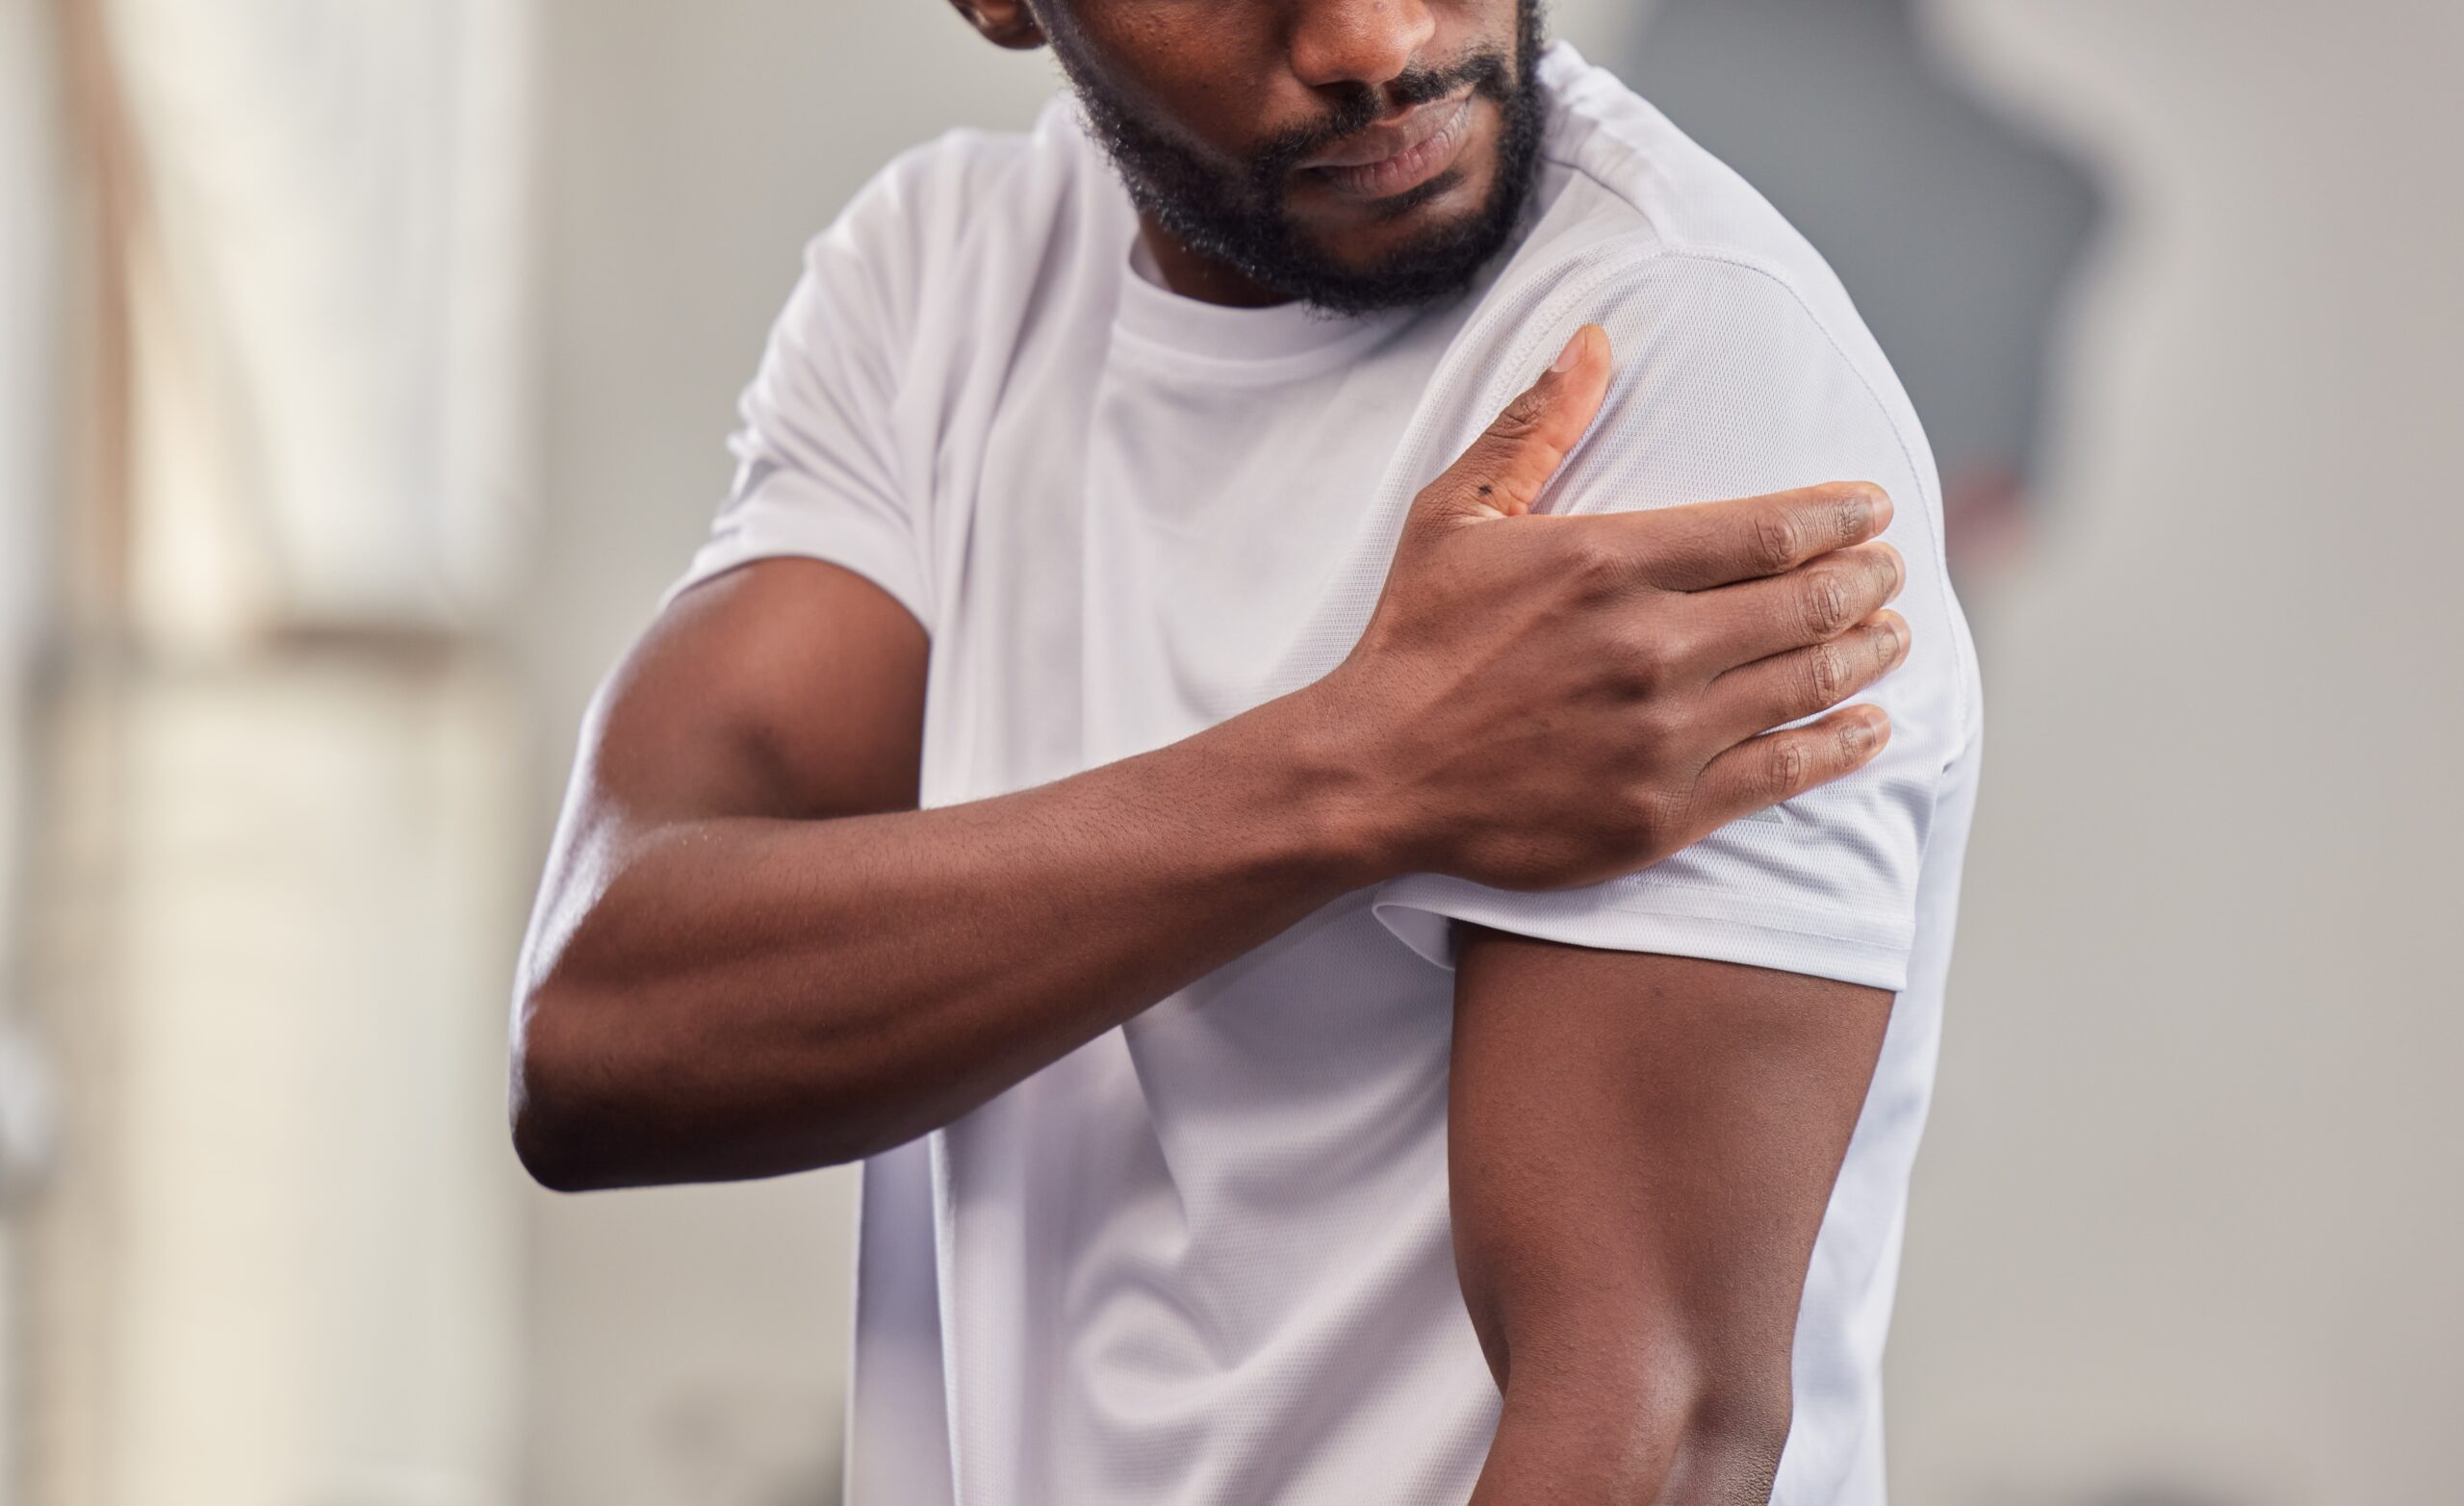 Shoulder,Pain,,Fitness,And,Black,Man,With,Injury,In,Gym